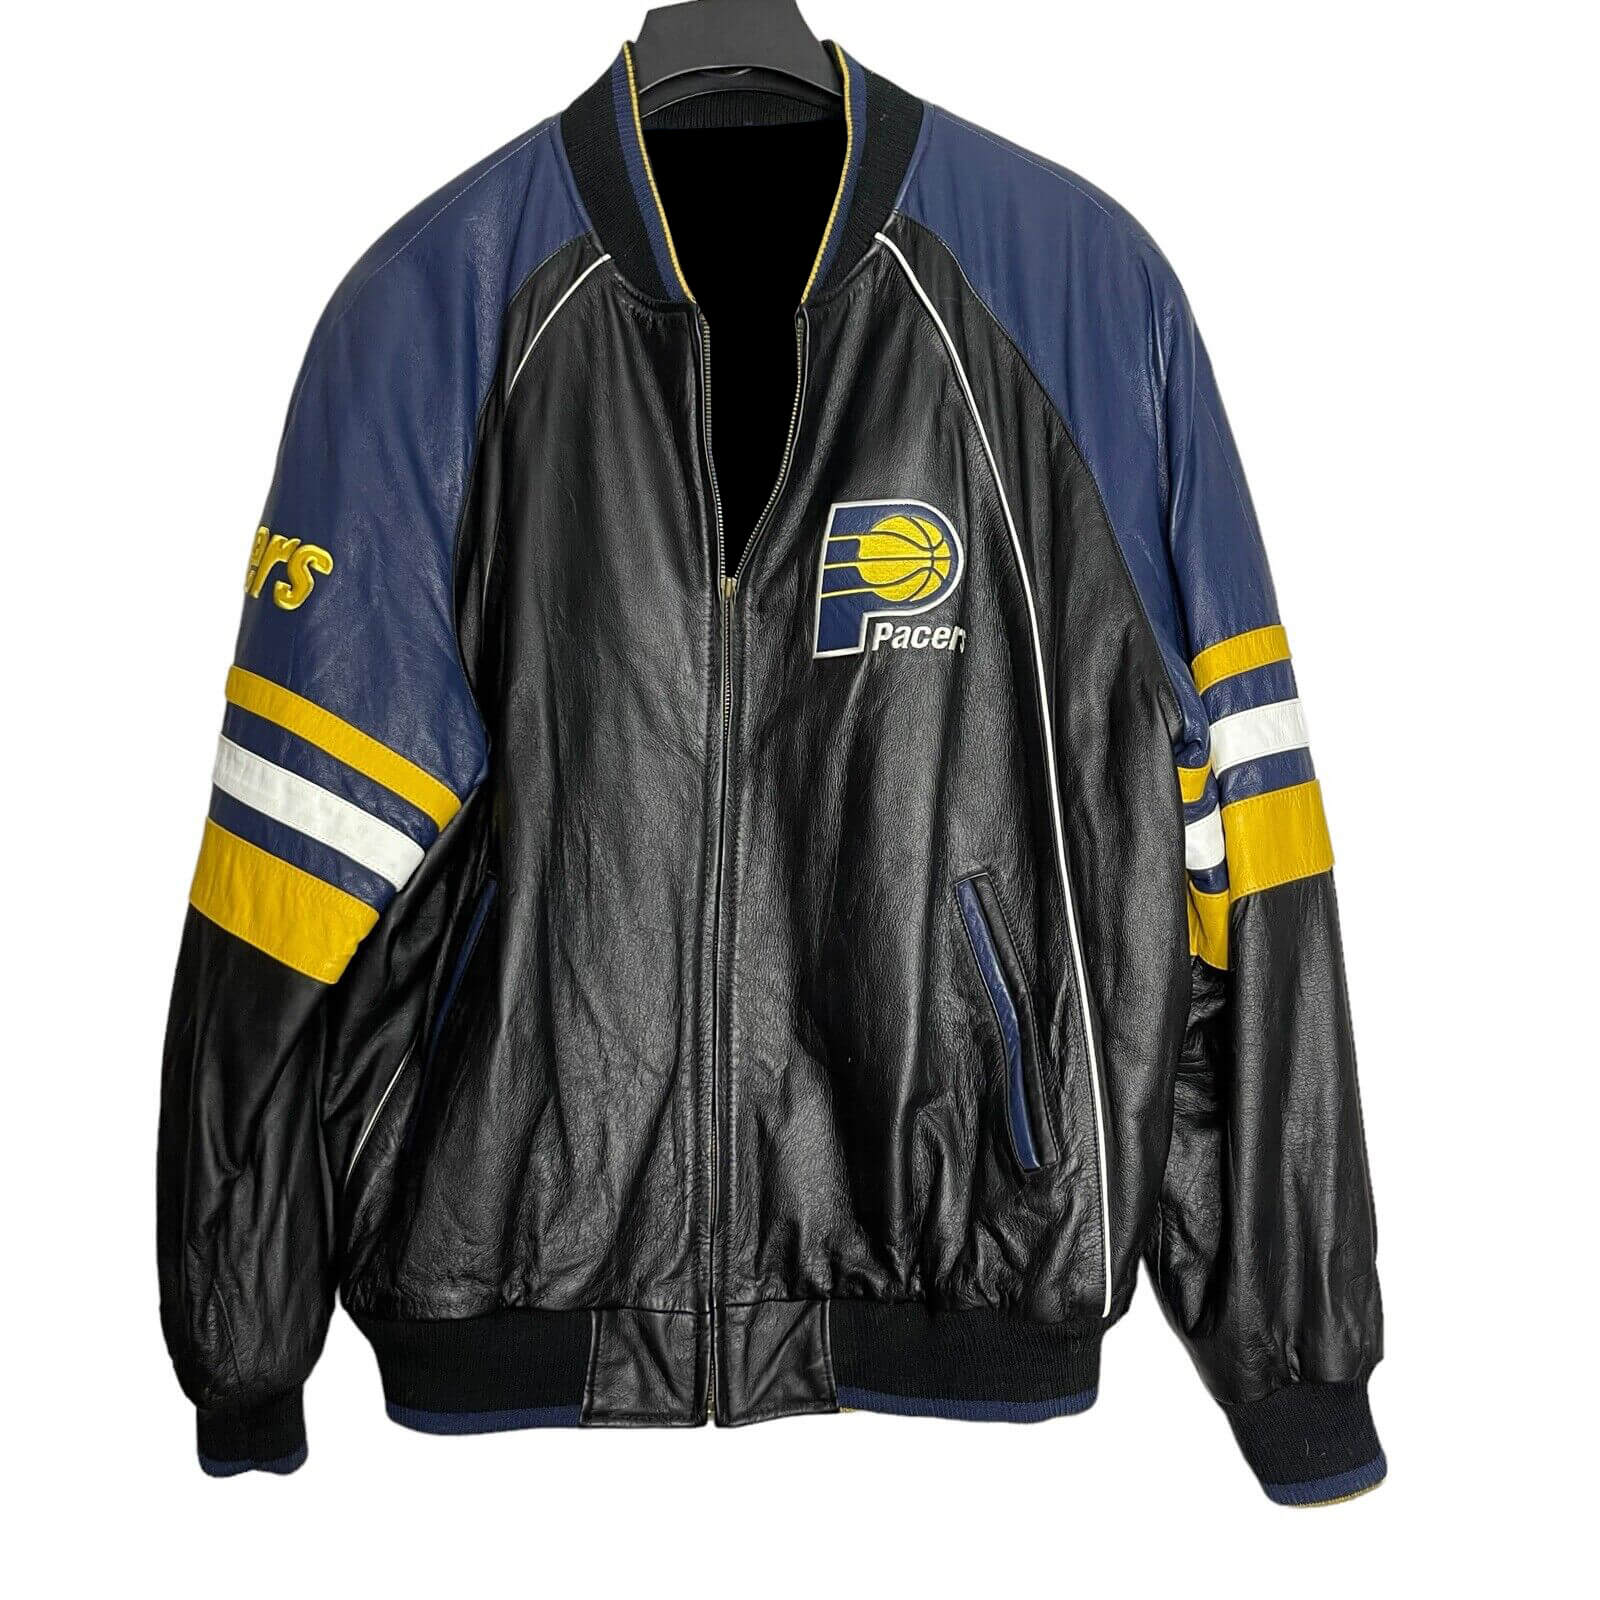 Maker of Jacket NBA Teams Indiana Pacers Basketball Leather Jacket